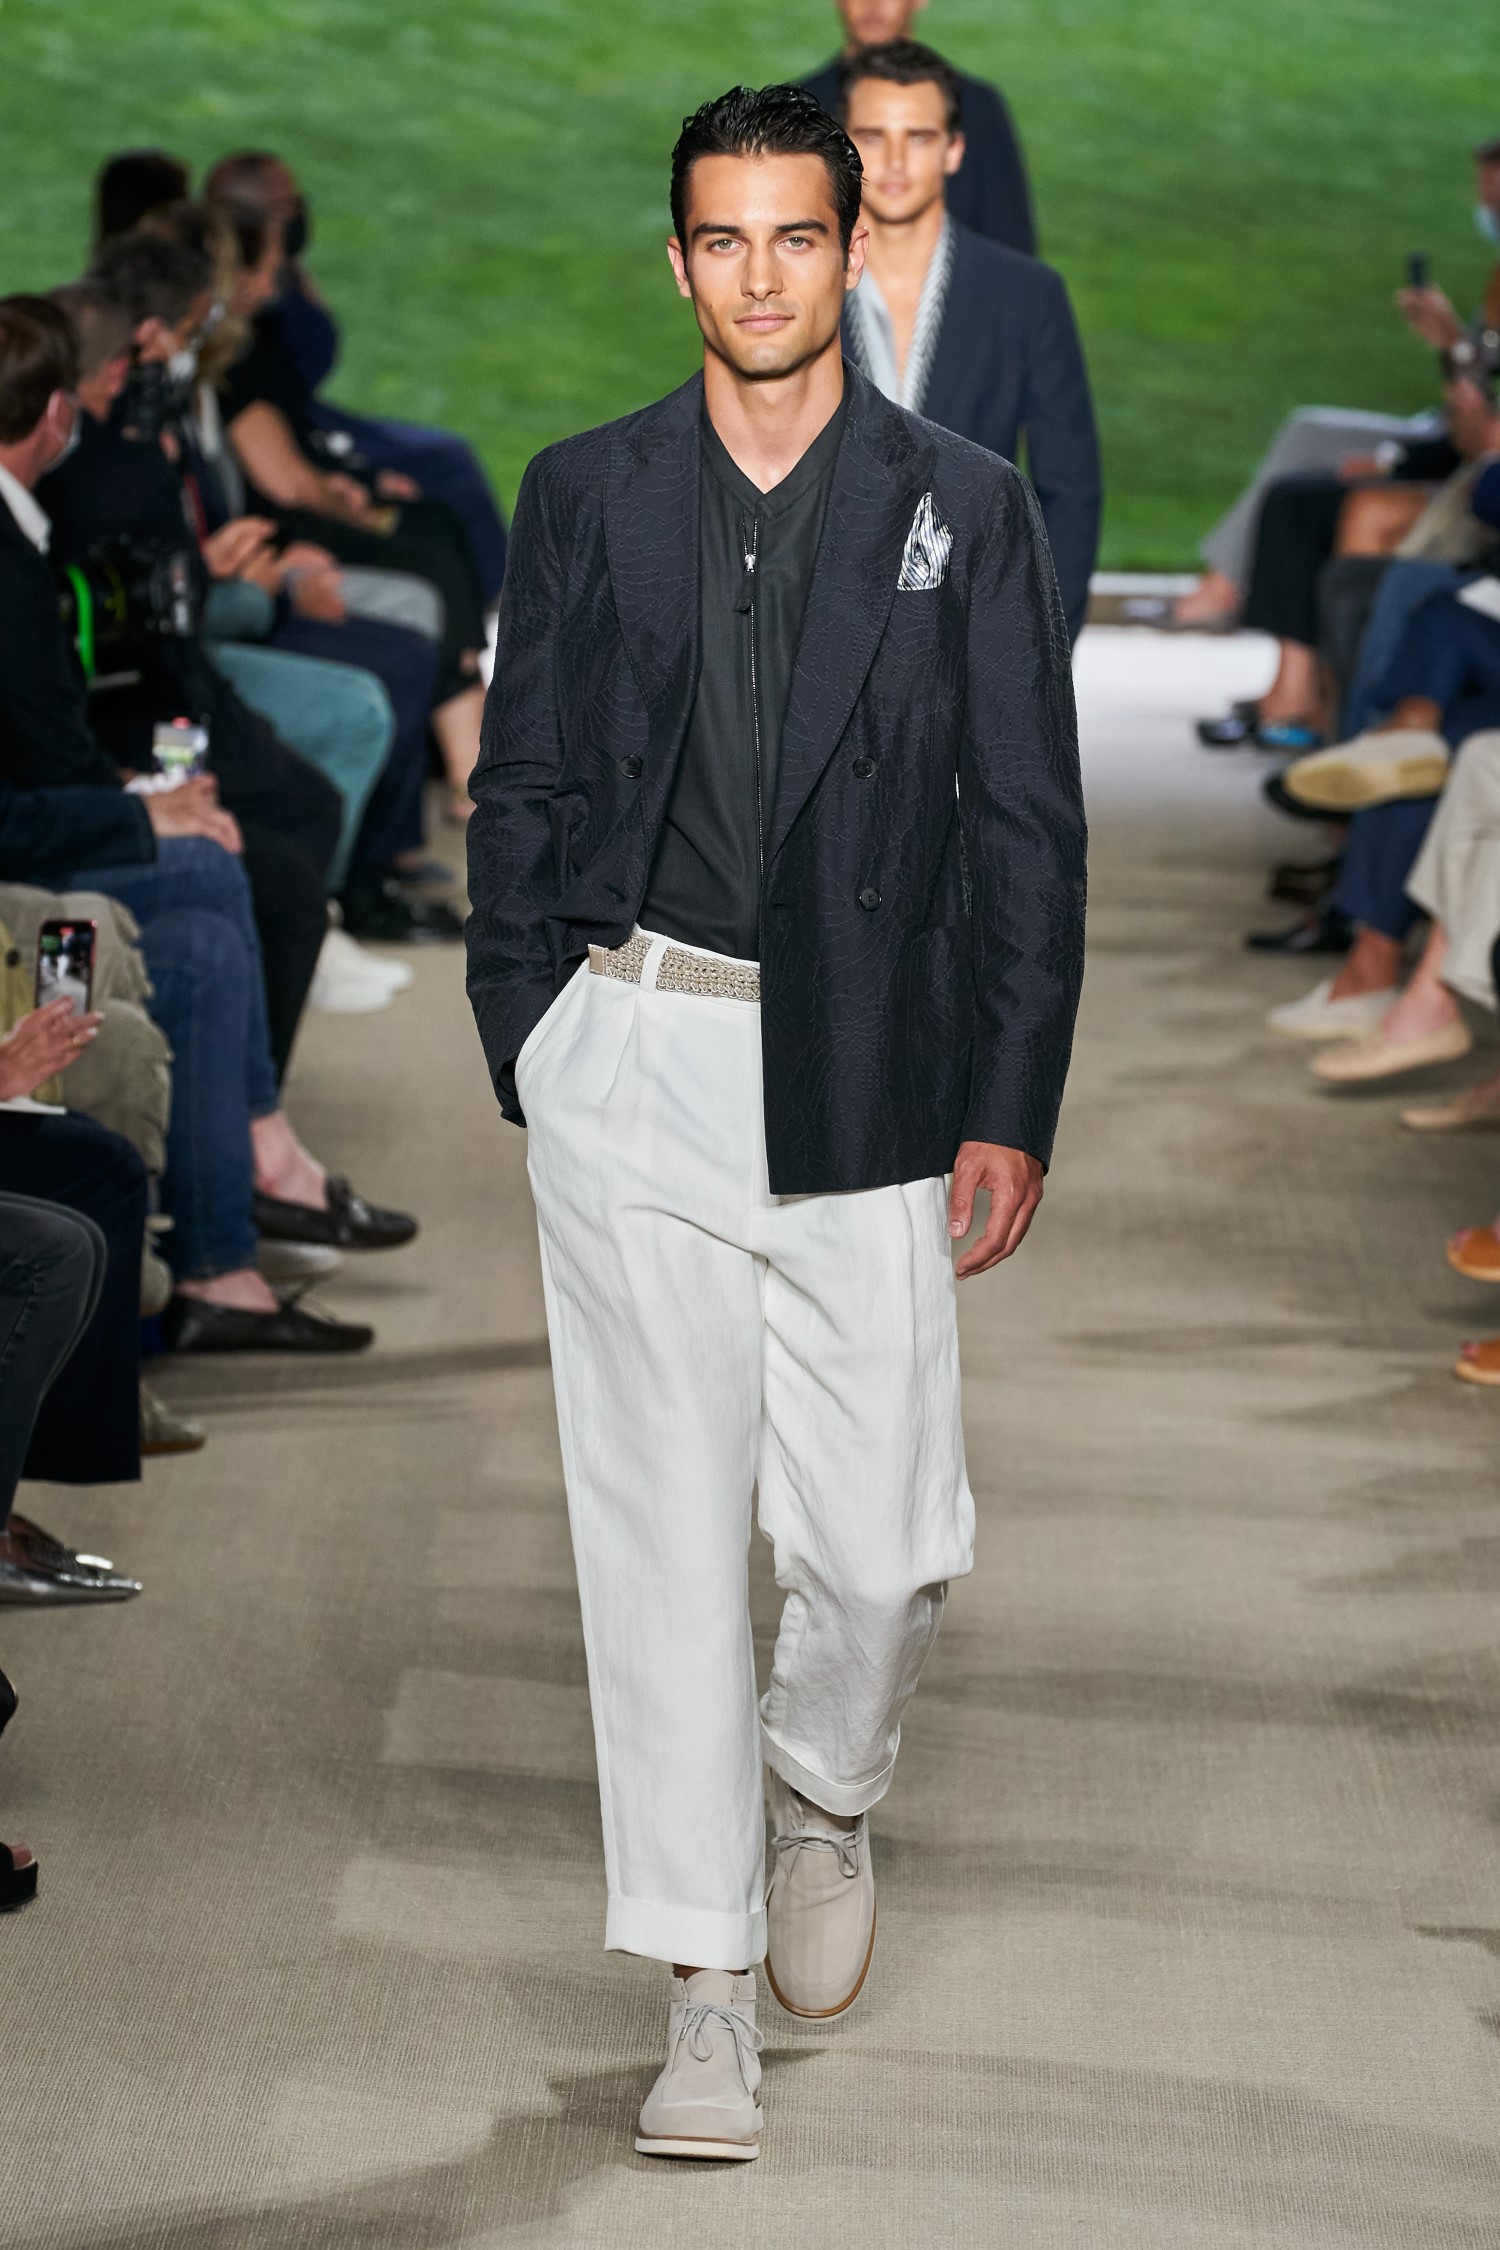 GIORGIO ARMANI LAUNCHES ITS NEW MEN SPRING/SUMMER 2023 ADVERTISING